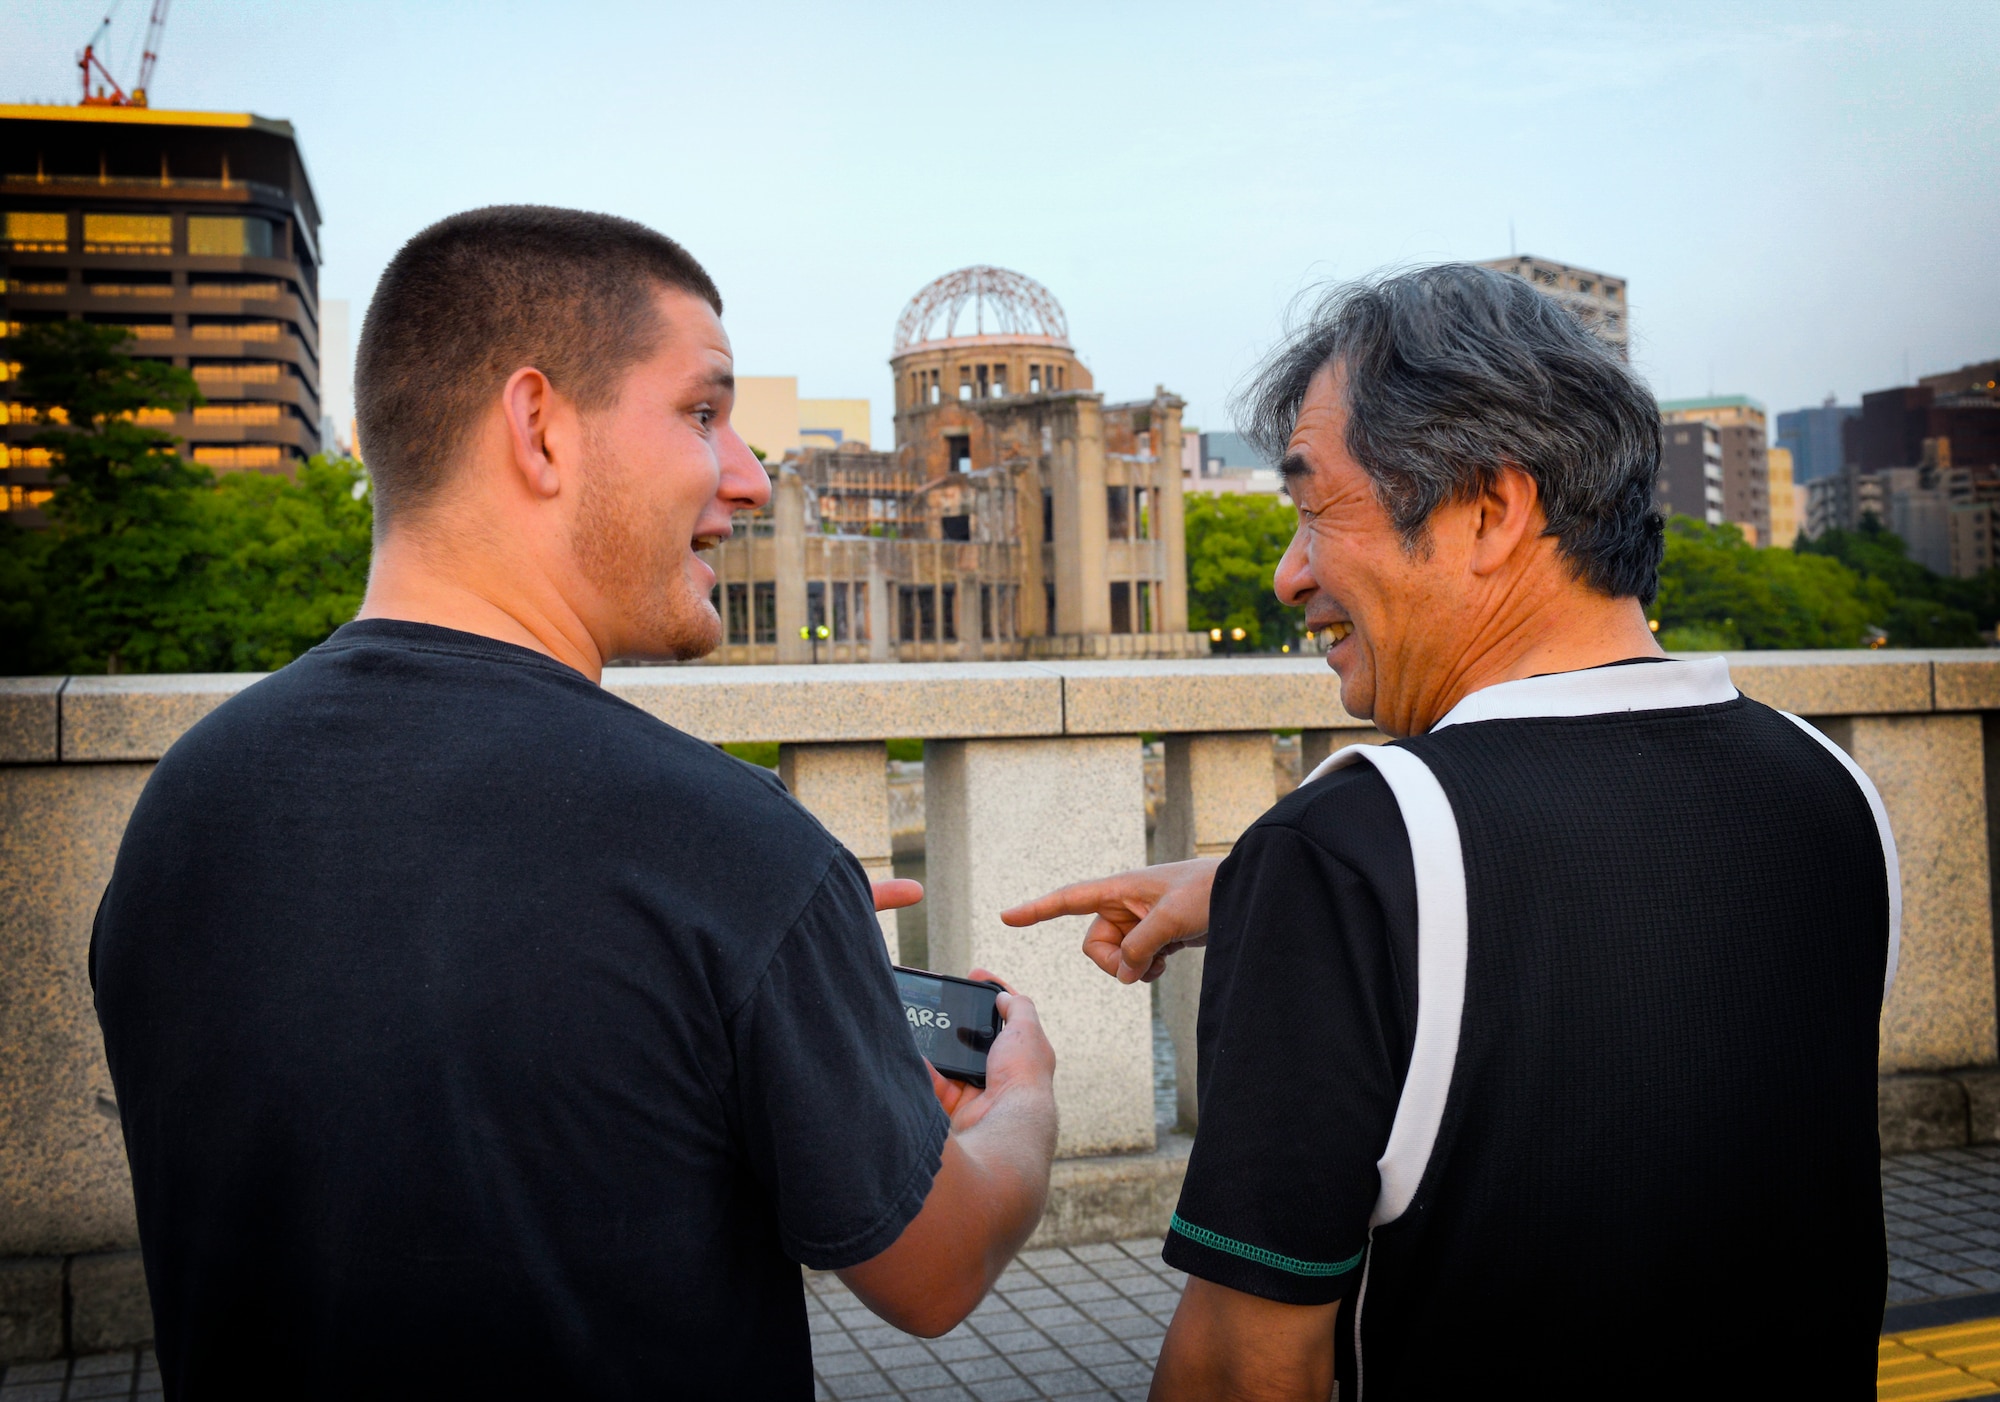 Joseph Galloway, 730th Air Mobility Squadron jet propulsion technician, discusses Japanese drift tracks with Fumio, Nissan 180sx owner, in front of the Hiroshima Peace Memorial at Hiroshima, Japan, May 31, 2016. Despite the fact that there are Japanese living today who experienced World War II, many Japanese and Americans advocate continuing peace and friendship between Japan and the U.S. (U.S. Air Force photo by Airman 1st Class Elizabeth Baker/Released) 